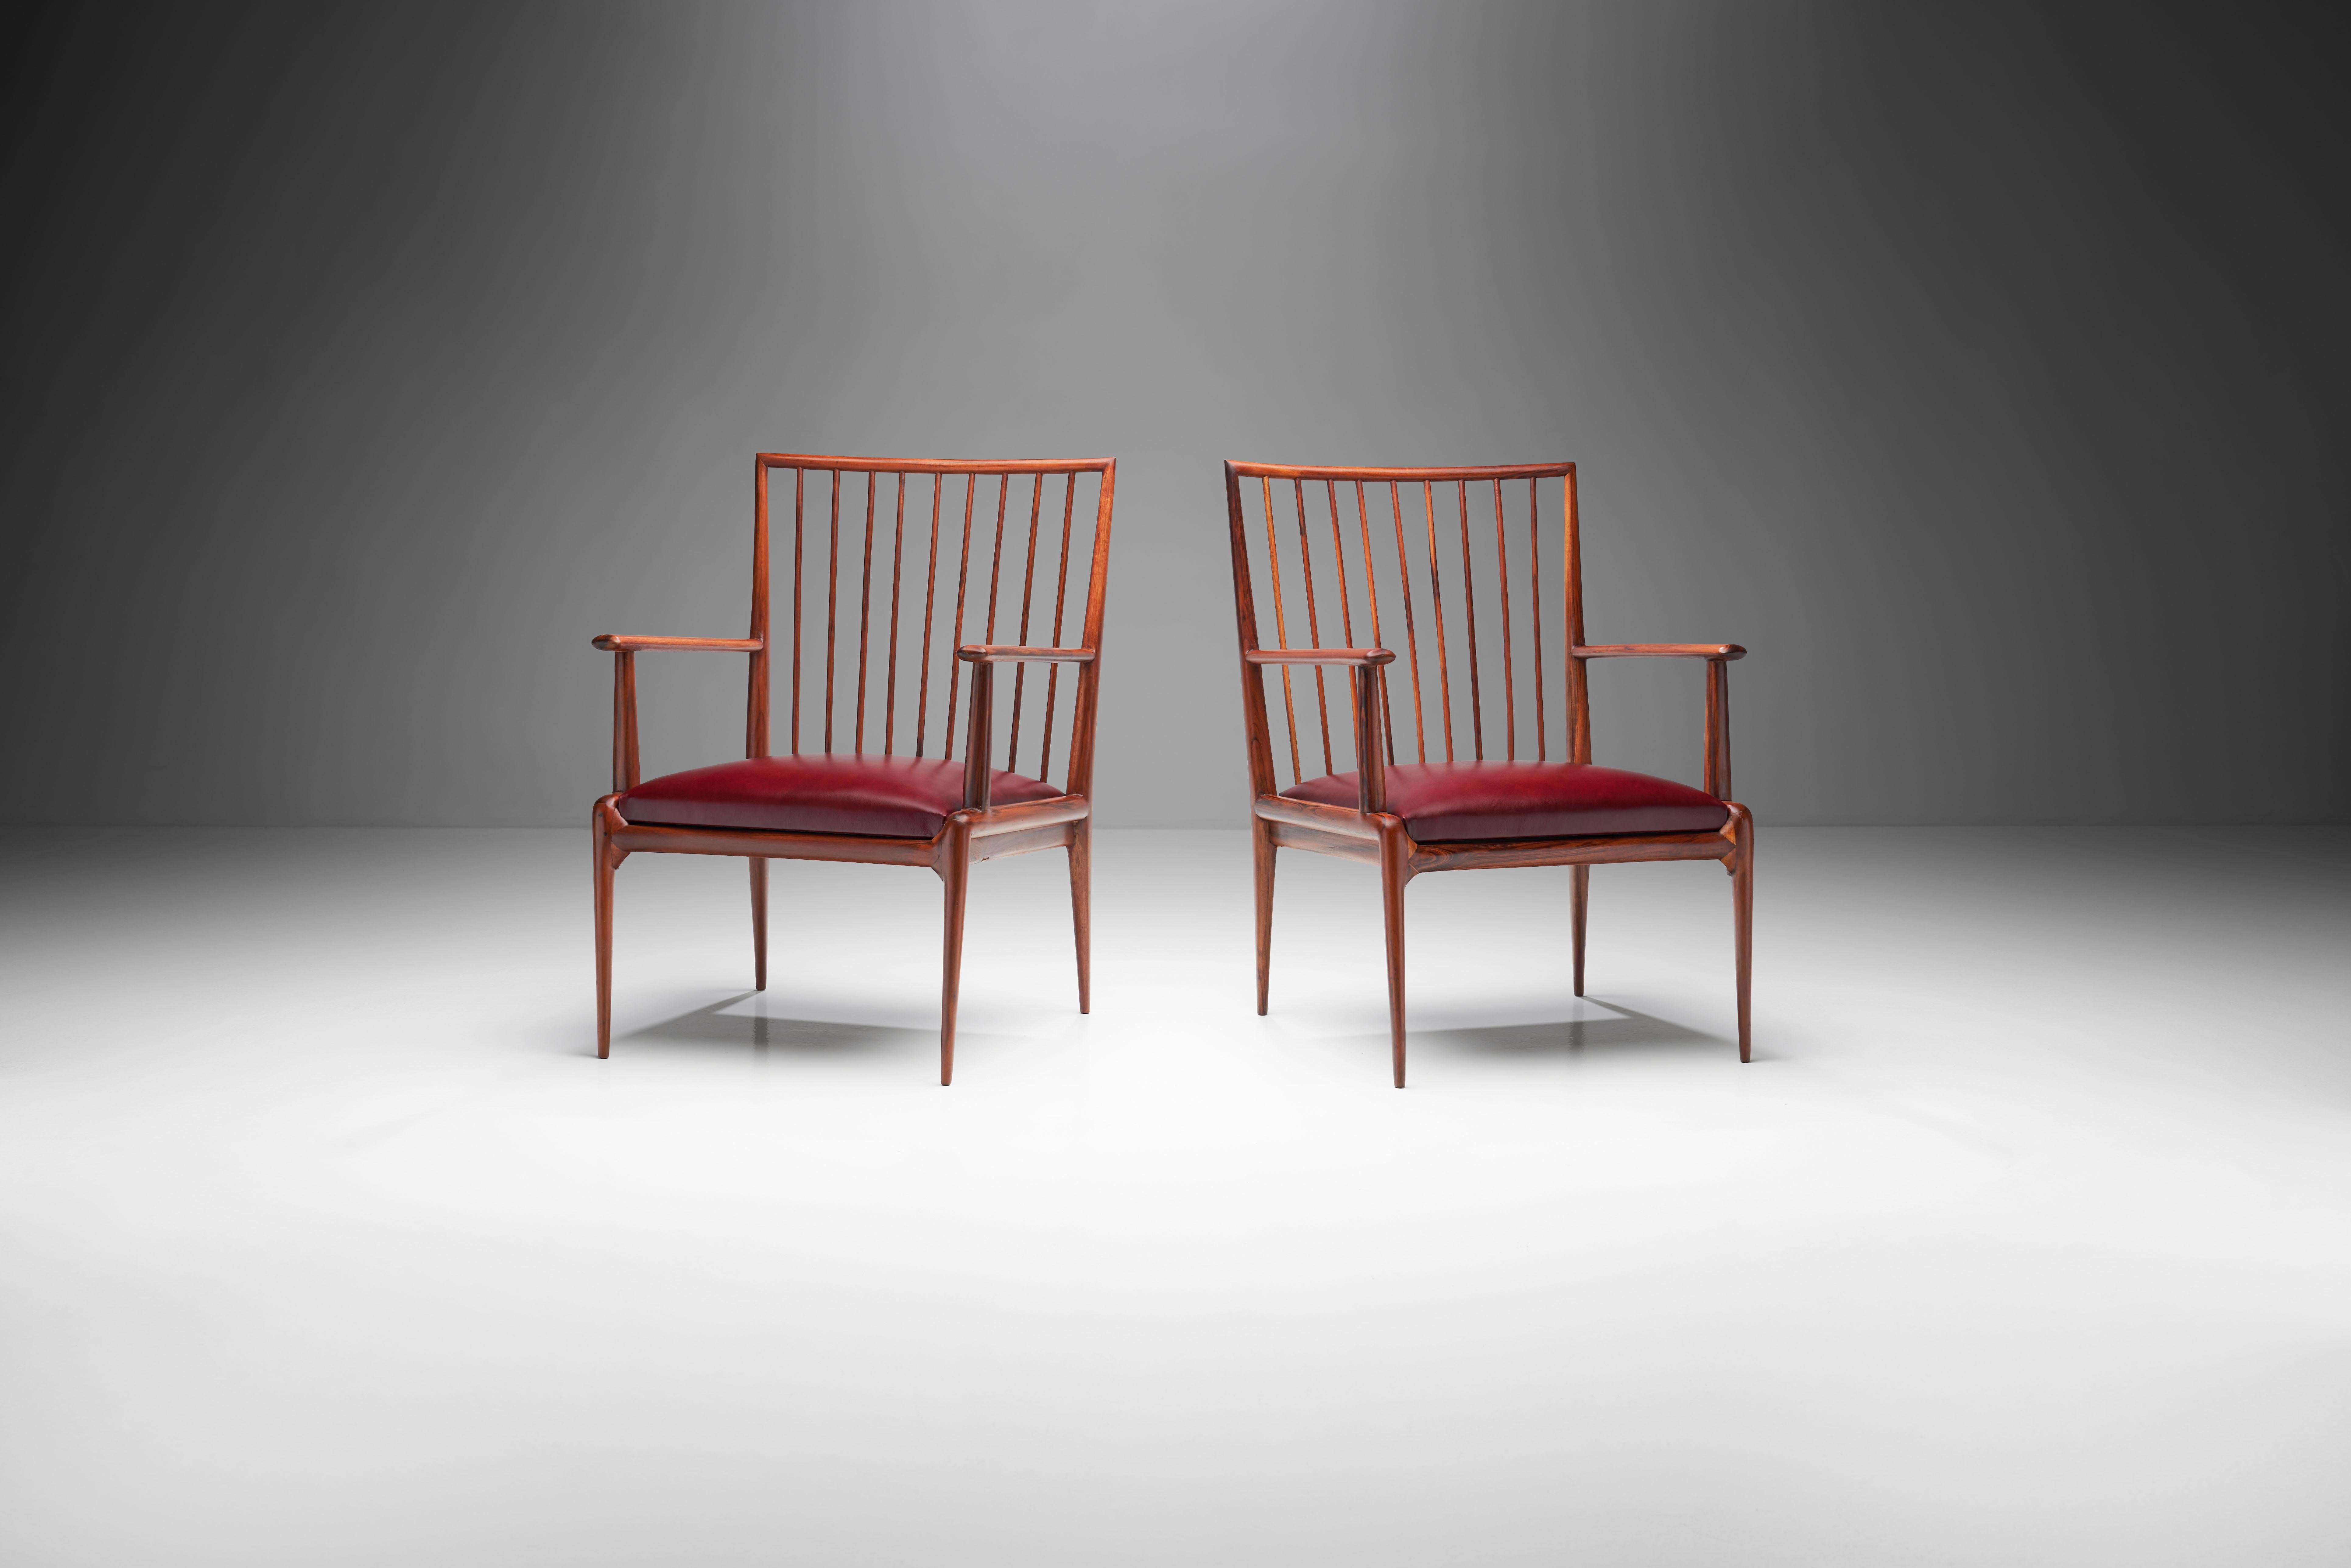 This rare pair of mid-century Brazilian armchairs is attributed to the design collective Branco and Preto. Made in a rational and geometric way, they present lightness and simplicity.

These chairs are carved from Brazilian wood in a masterful